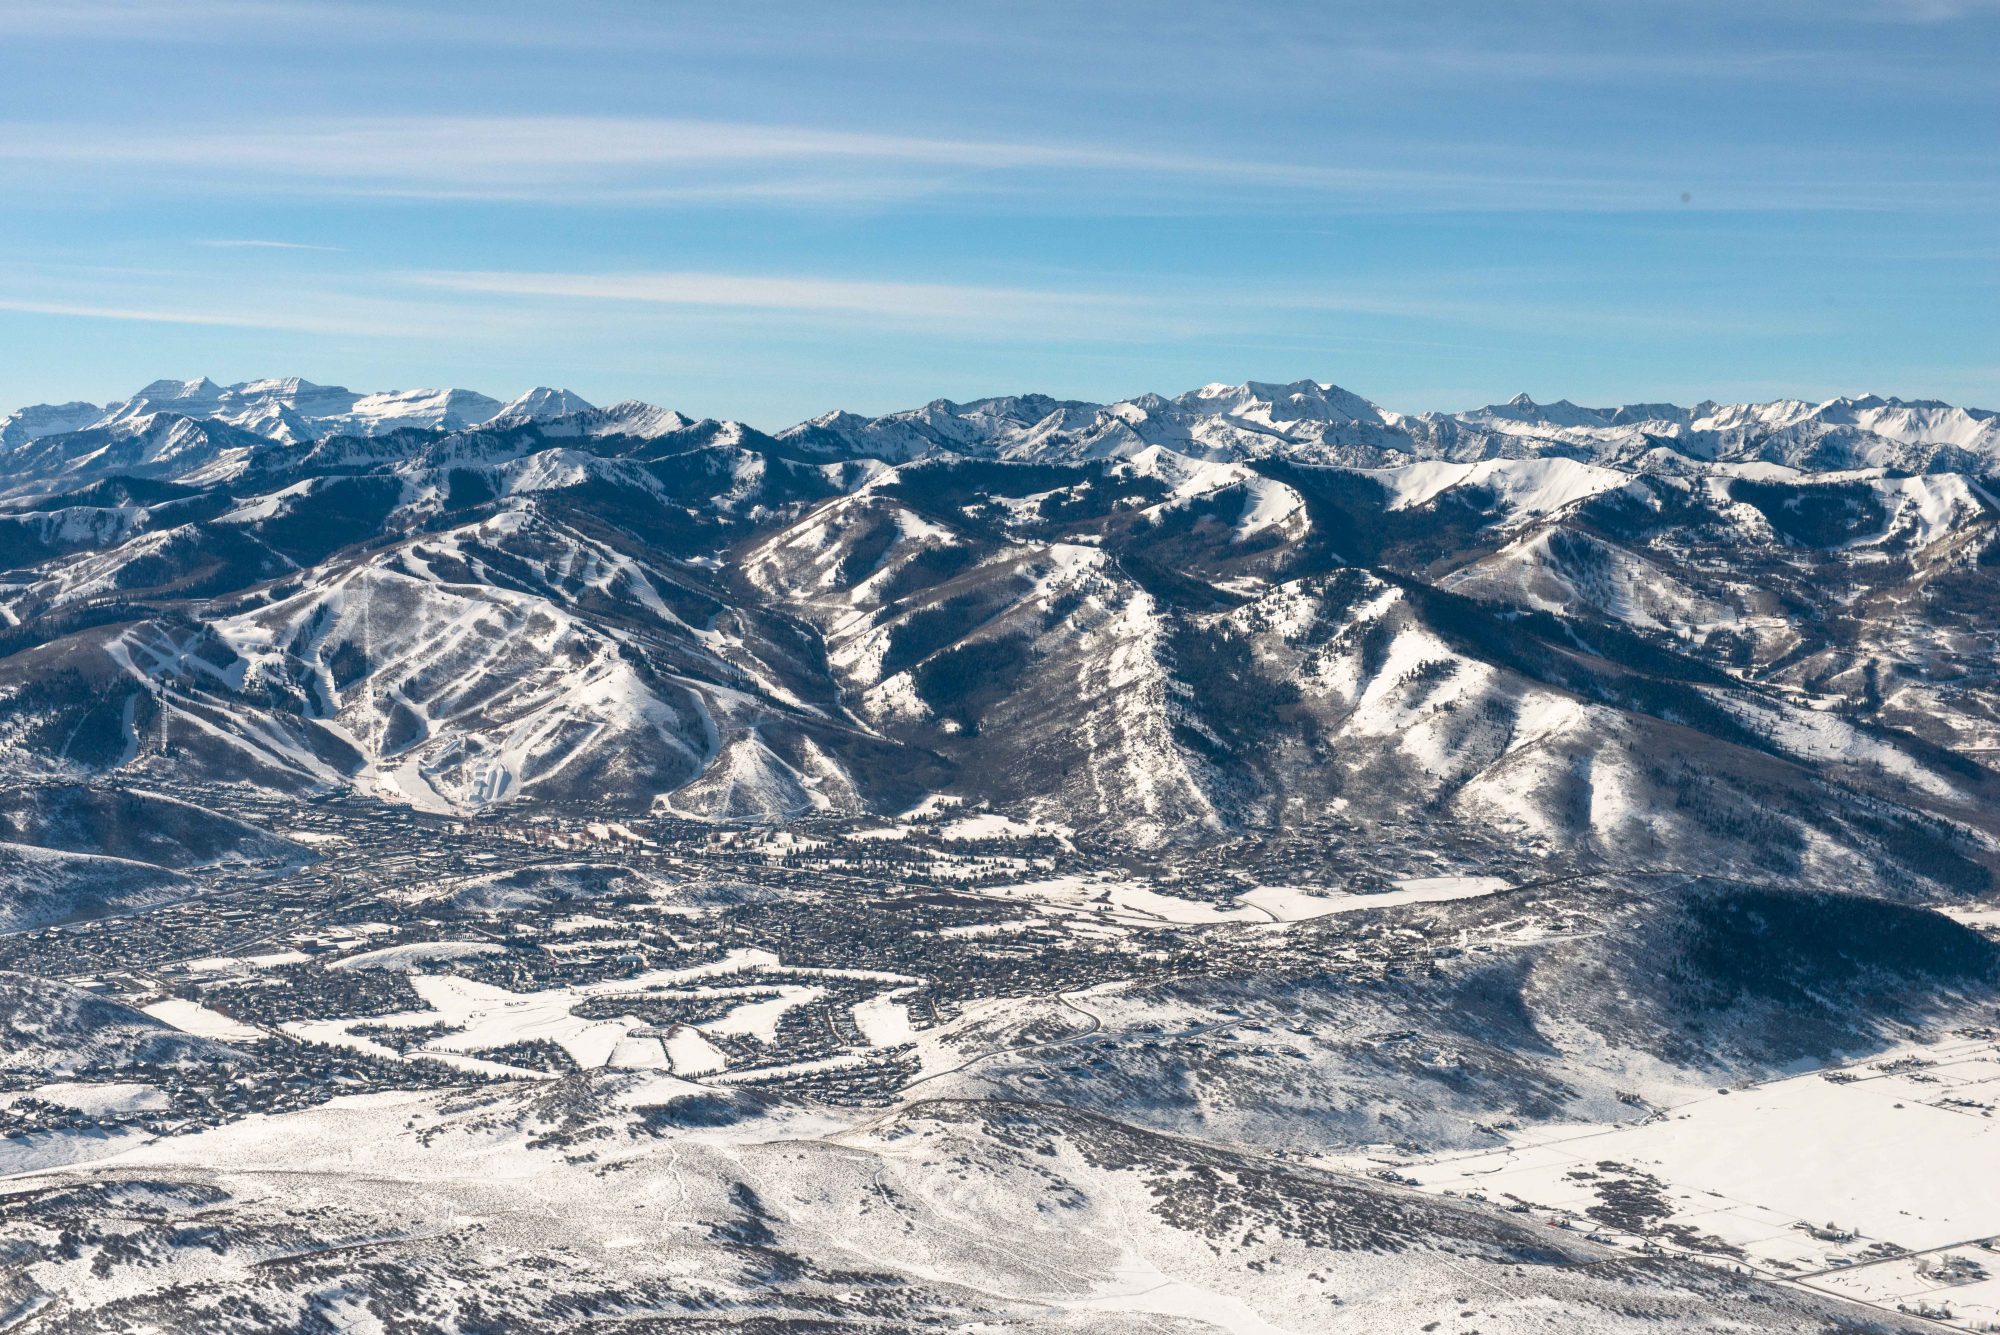 Park City Town. Photo: Vail Resorts. Vail Resorts Ceo Rob Katz Gives $2 Million in Grants to Support Mental & Behavioral Health Programs in Mountain Resort Communities across North America.